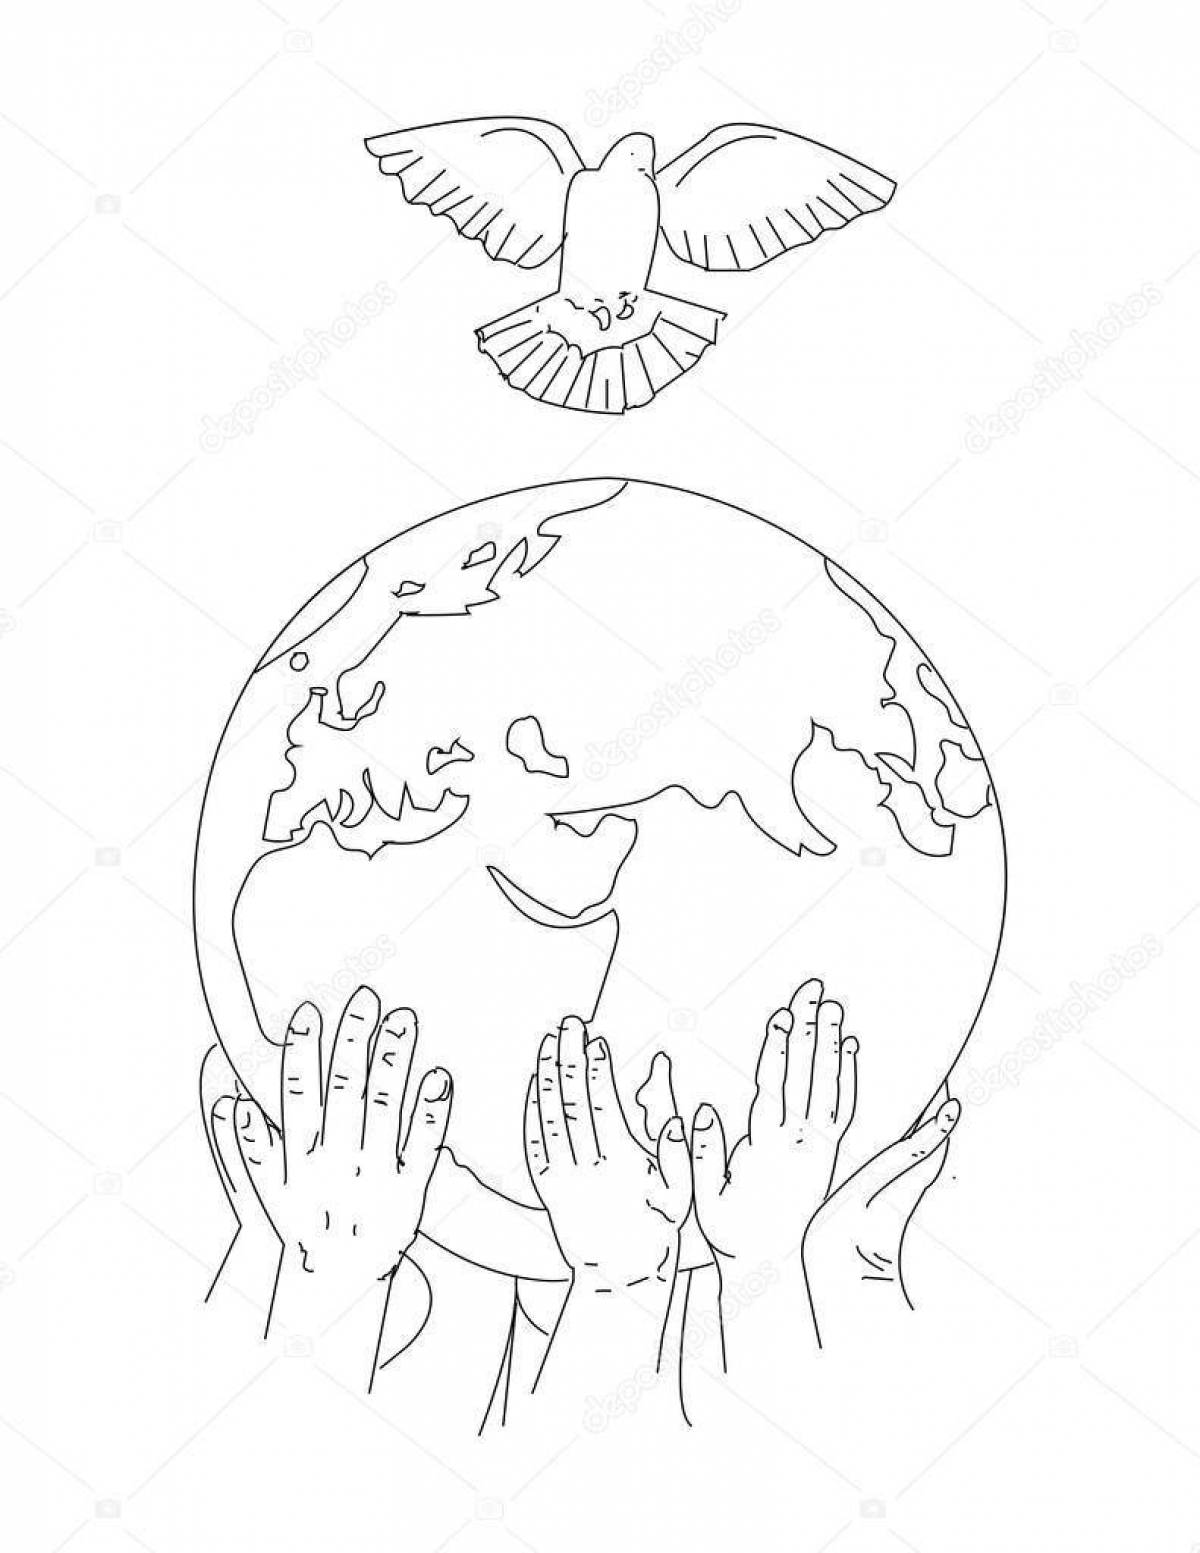 Coloring page blissful peace on earth